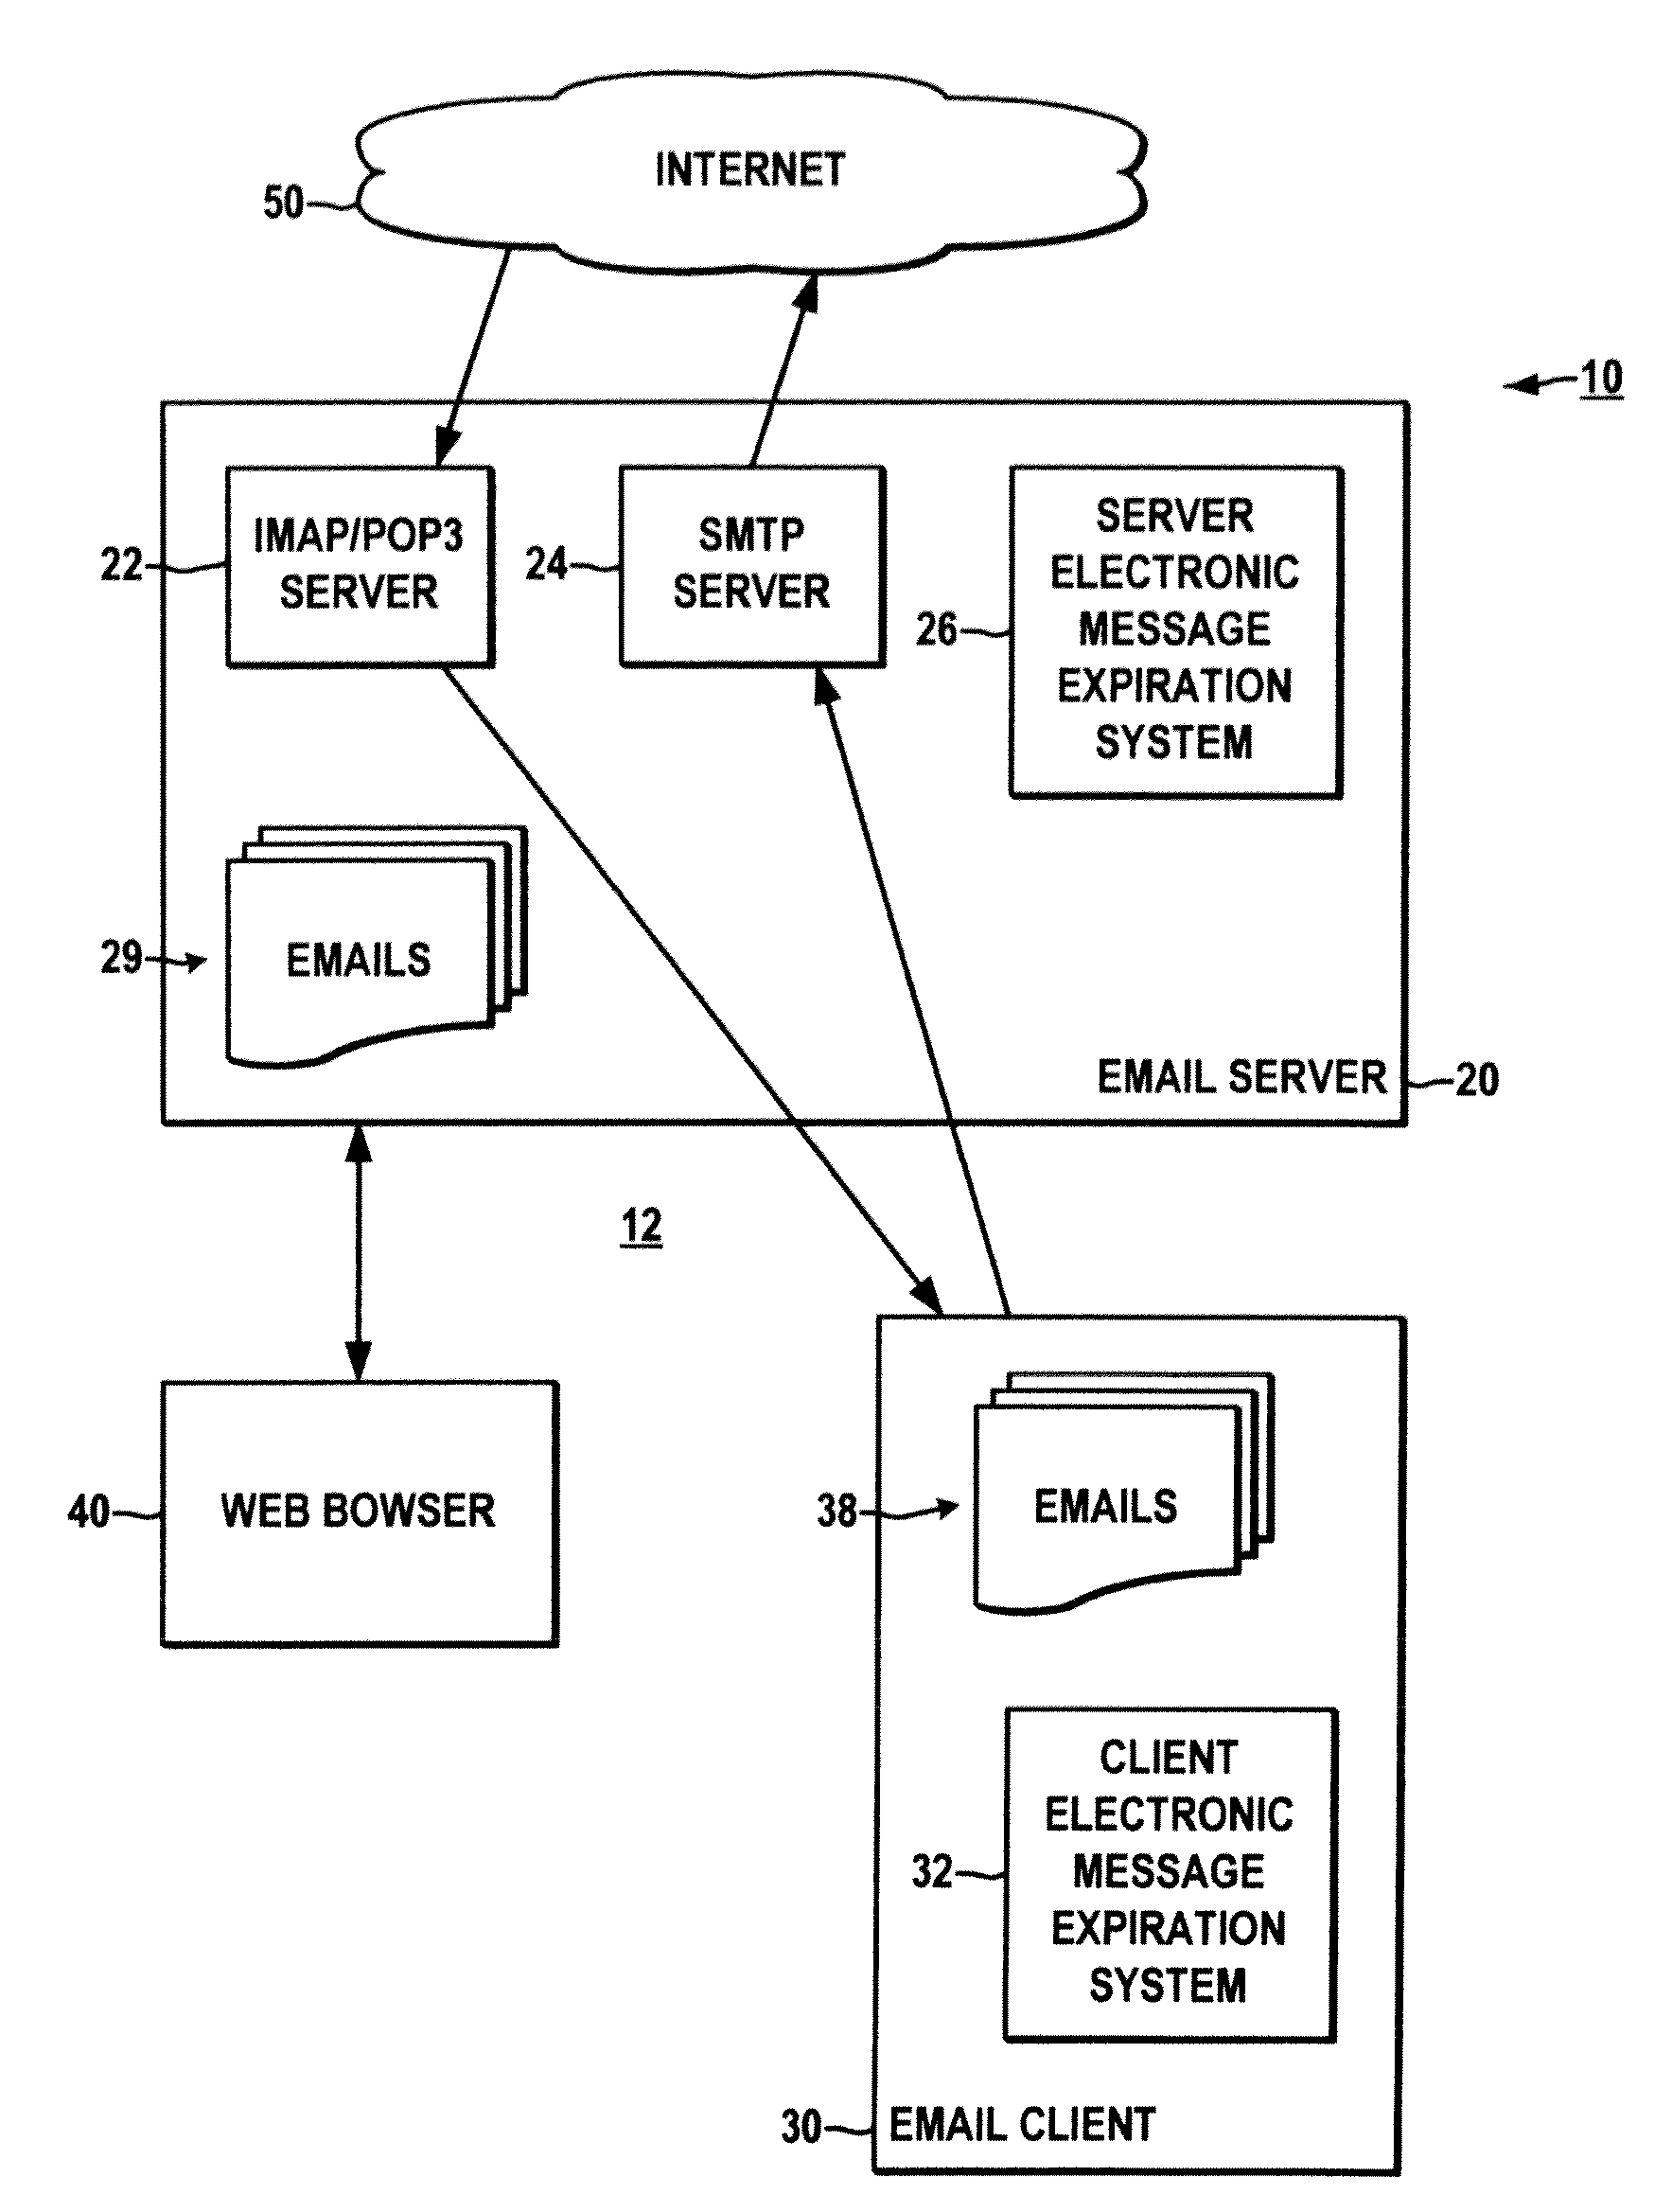 Methods and systems for expiration handling in electronic message systems